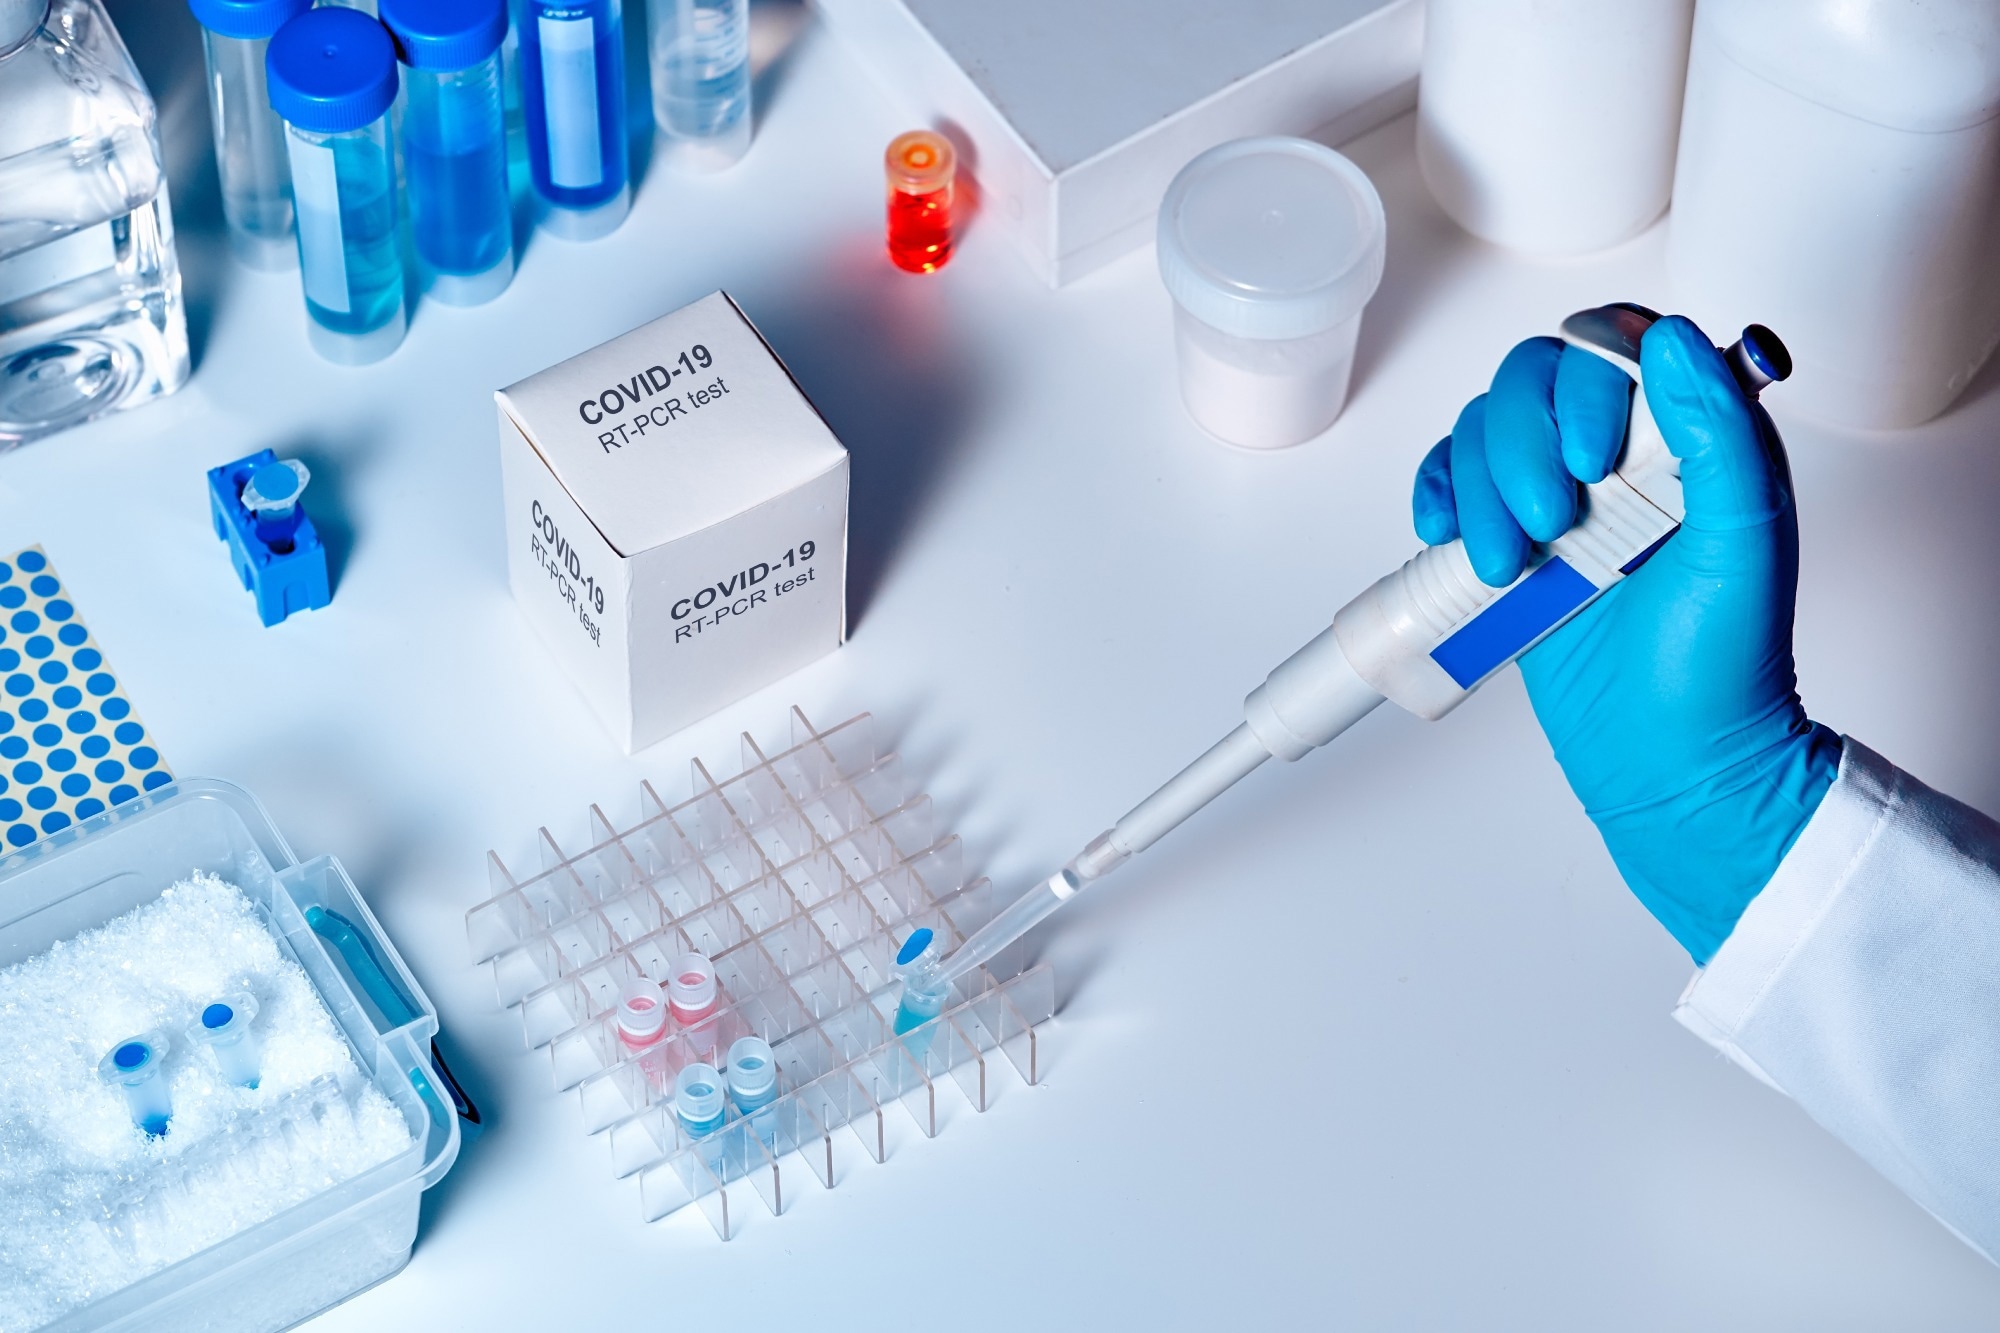 Study: RT-PCR genotyping assays to identify SARS-CoV-2 variants in England in 2021: a design and retrospective evaluation study, Image Credit: tilialucida / Shutterstock.com